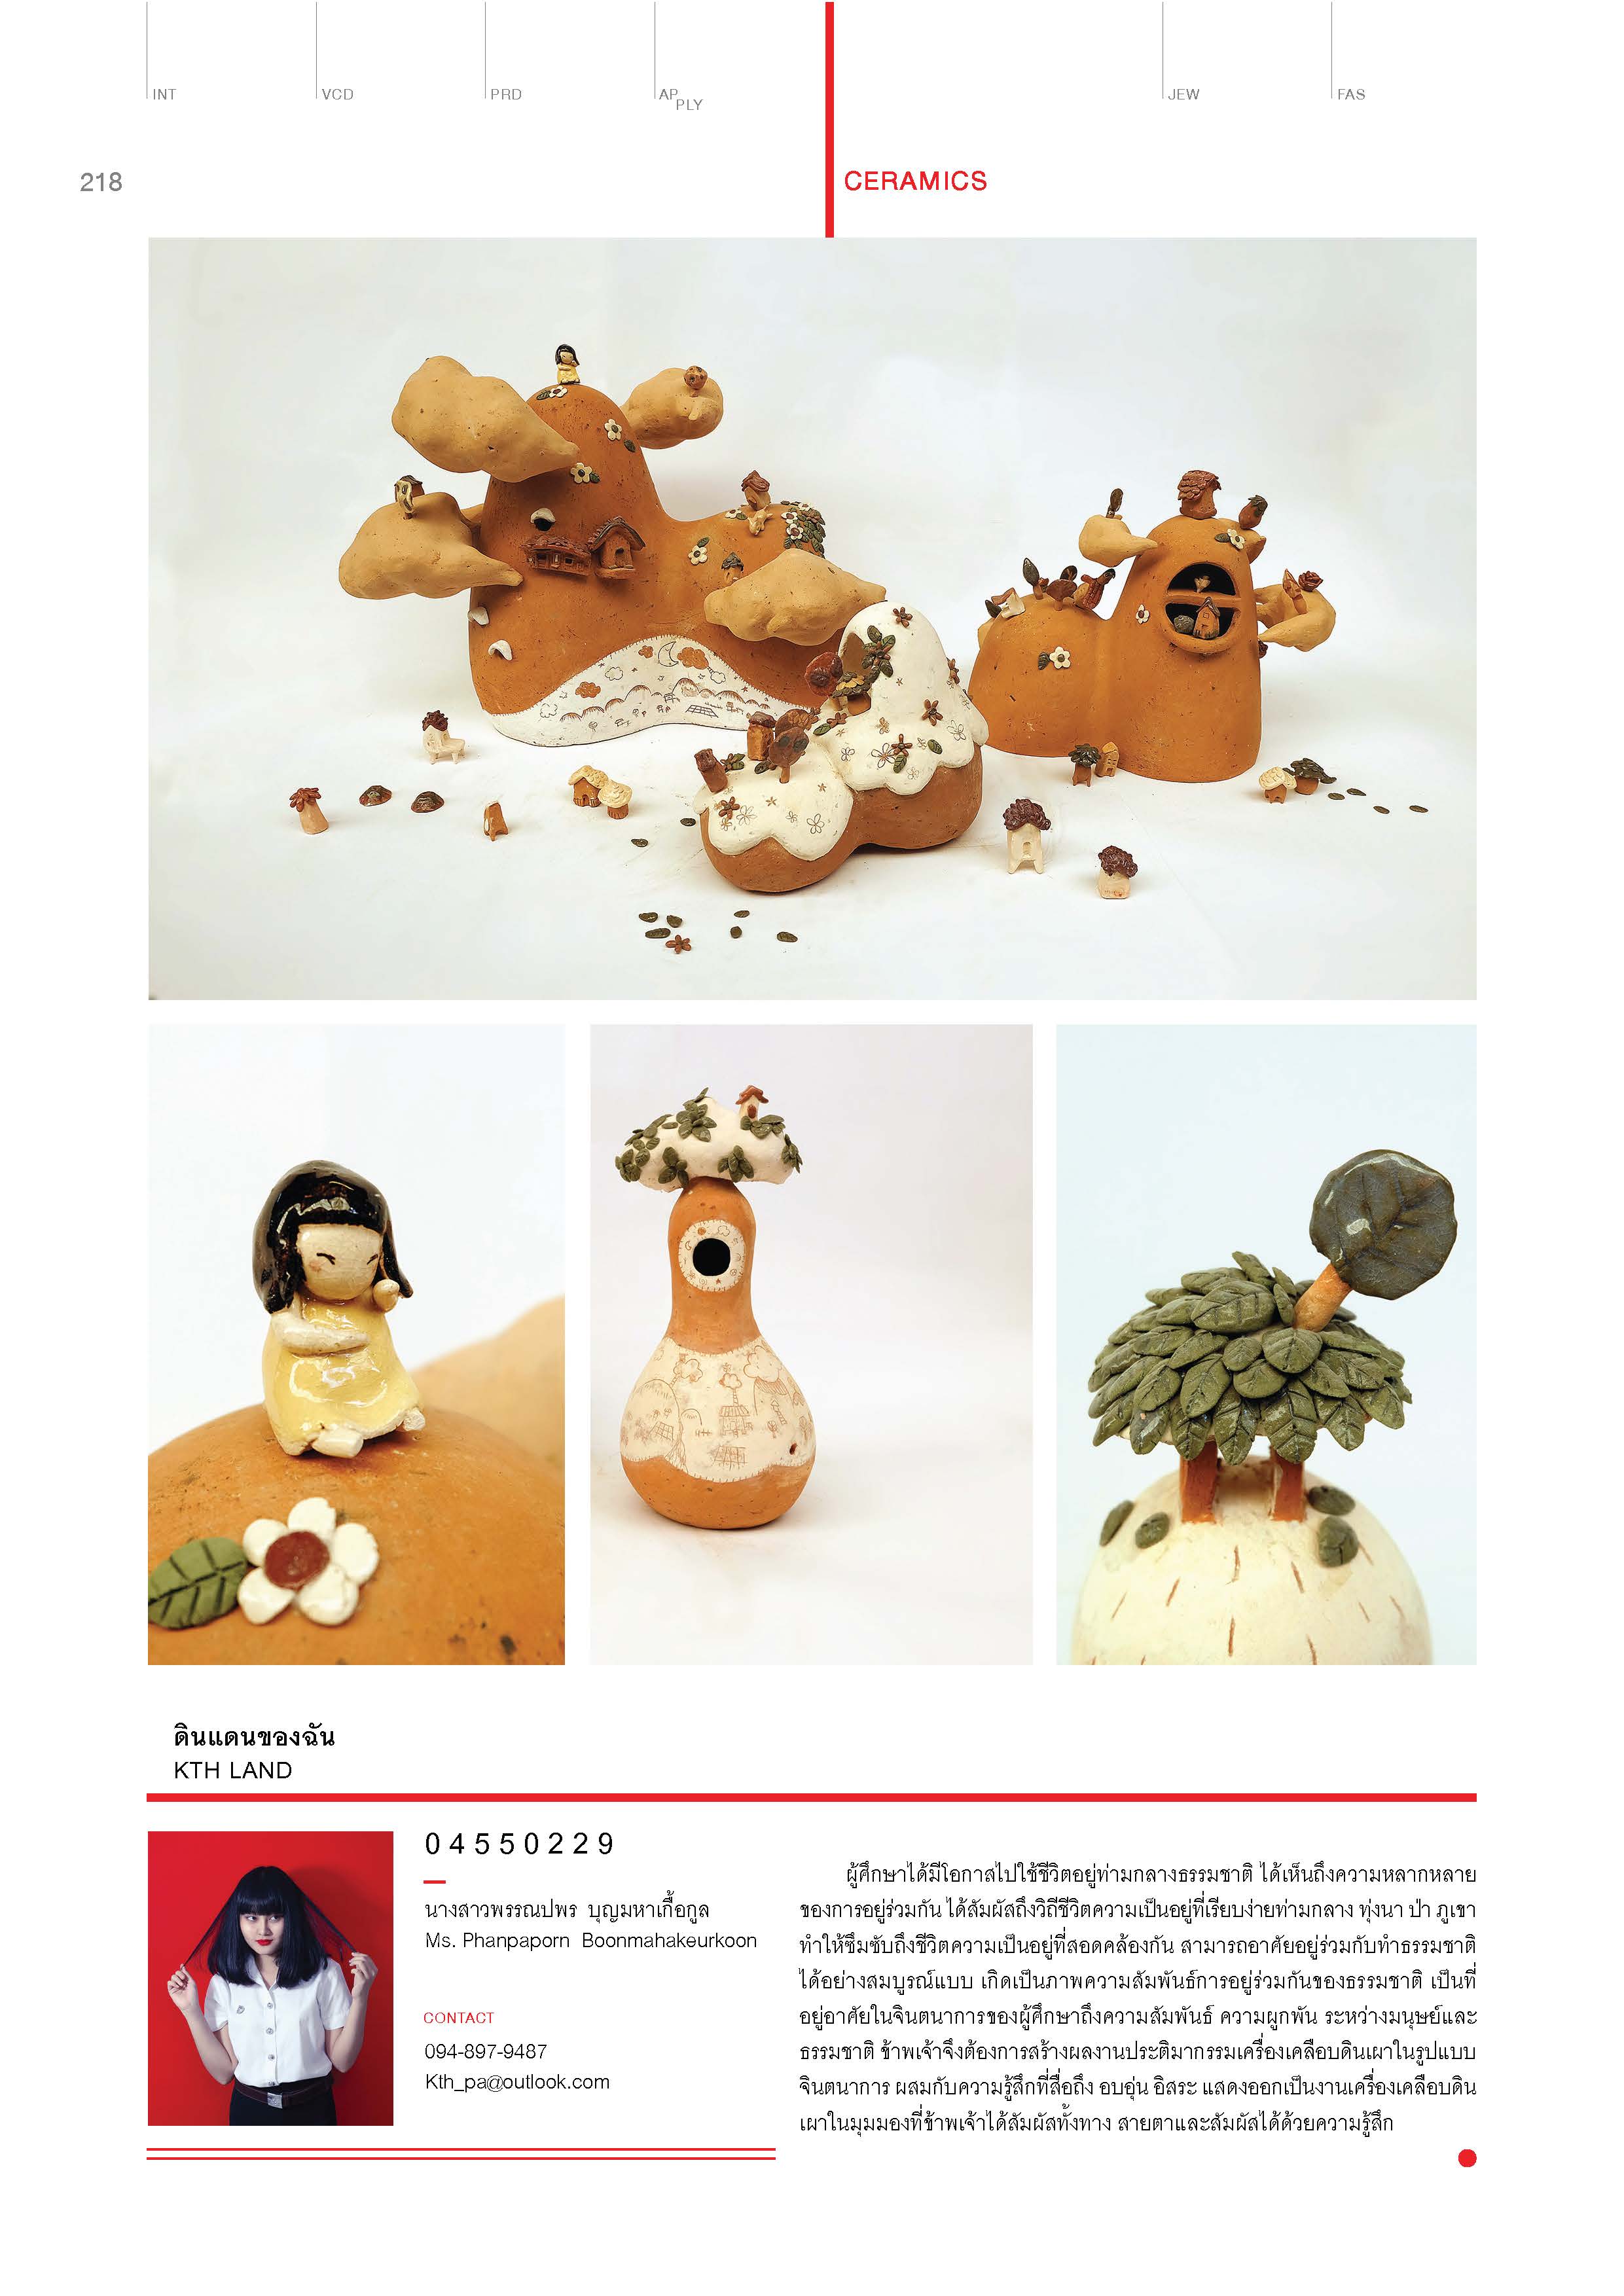 Photosynthesis-The46th_Art_Thesis_Exhibition_Decorative_Arts_Page_238